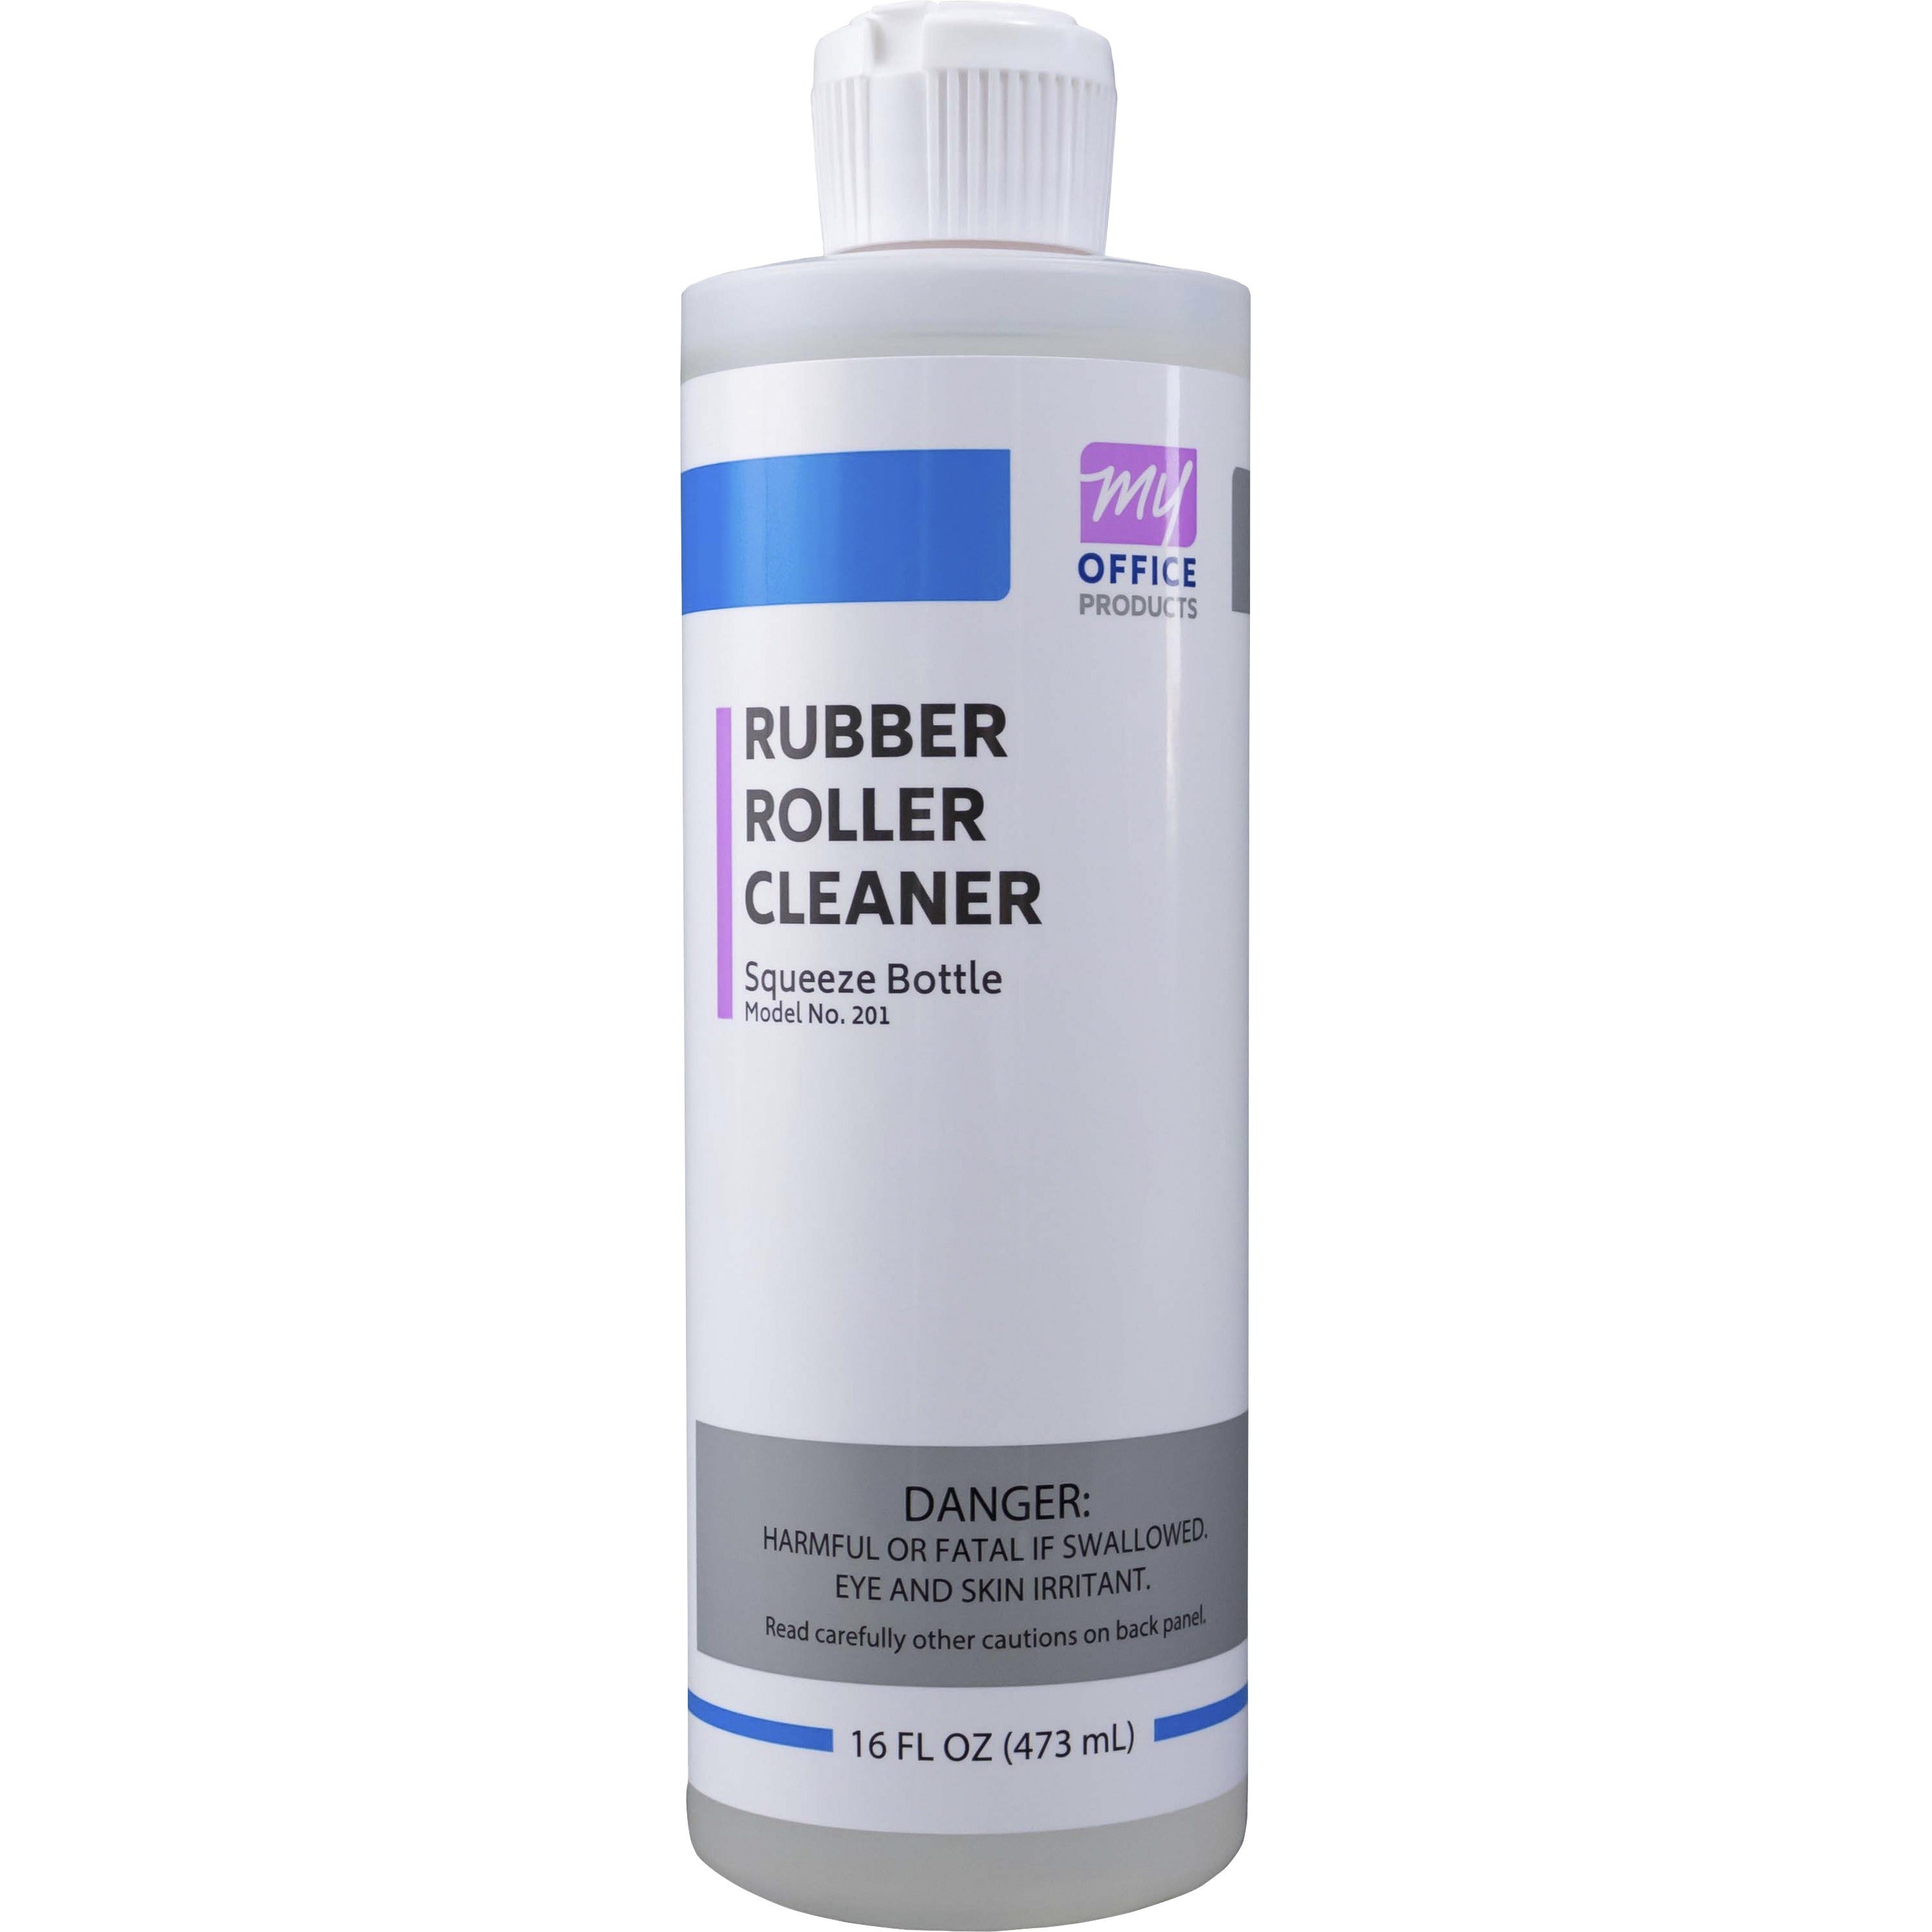 my-office-products-rubber-roller-cleaner-for-printer-roller-folder-burster-16-fl-ozsqueeze-bottle-1-each-white_pre201 - 1